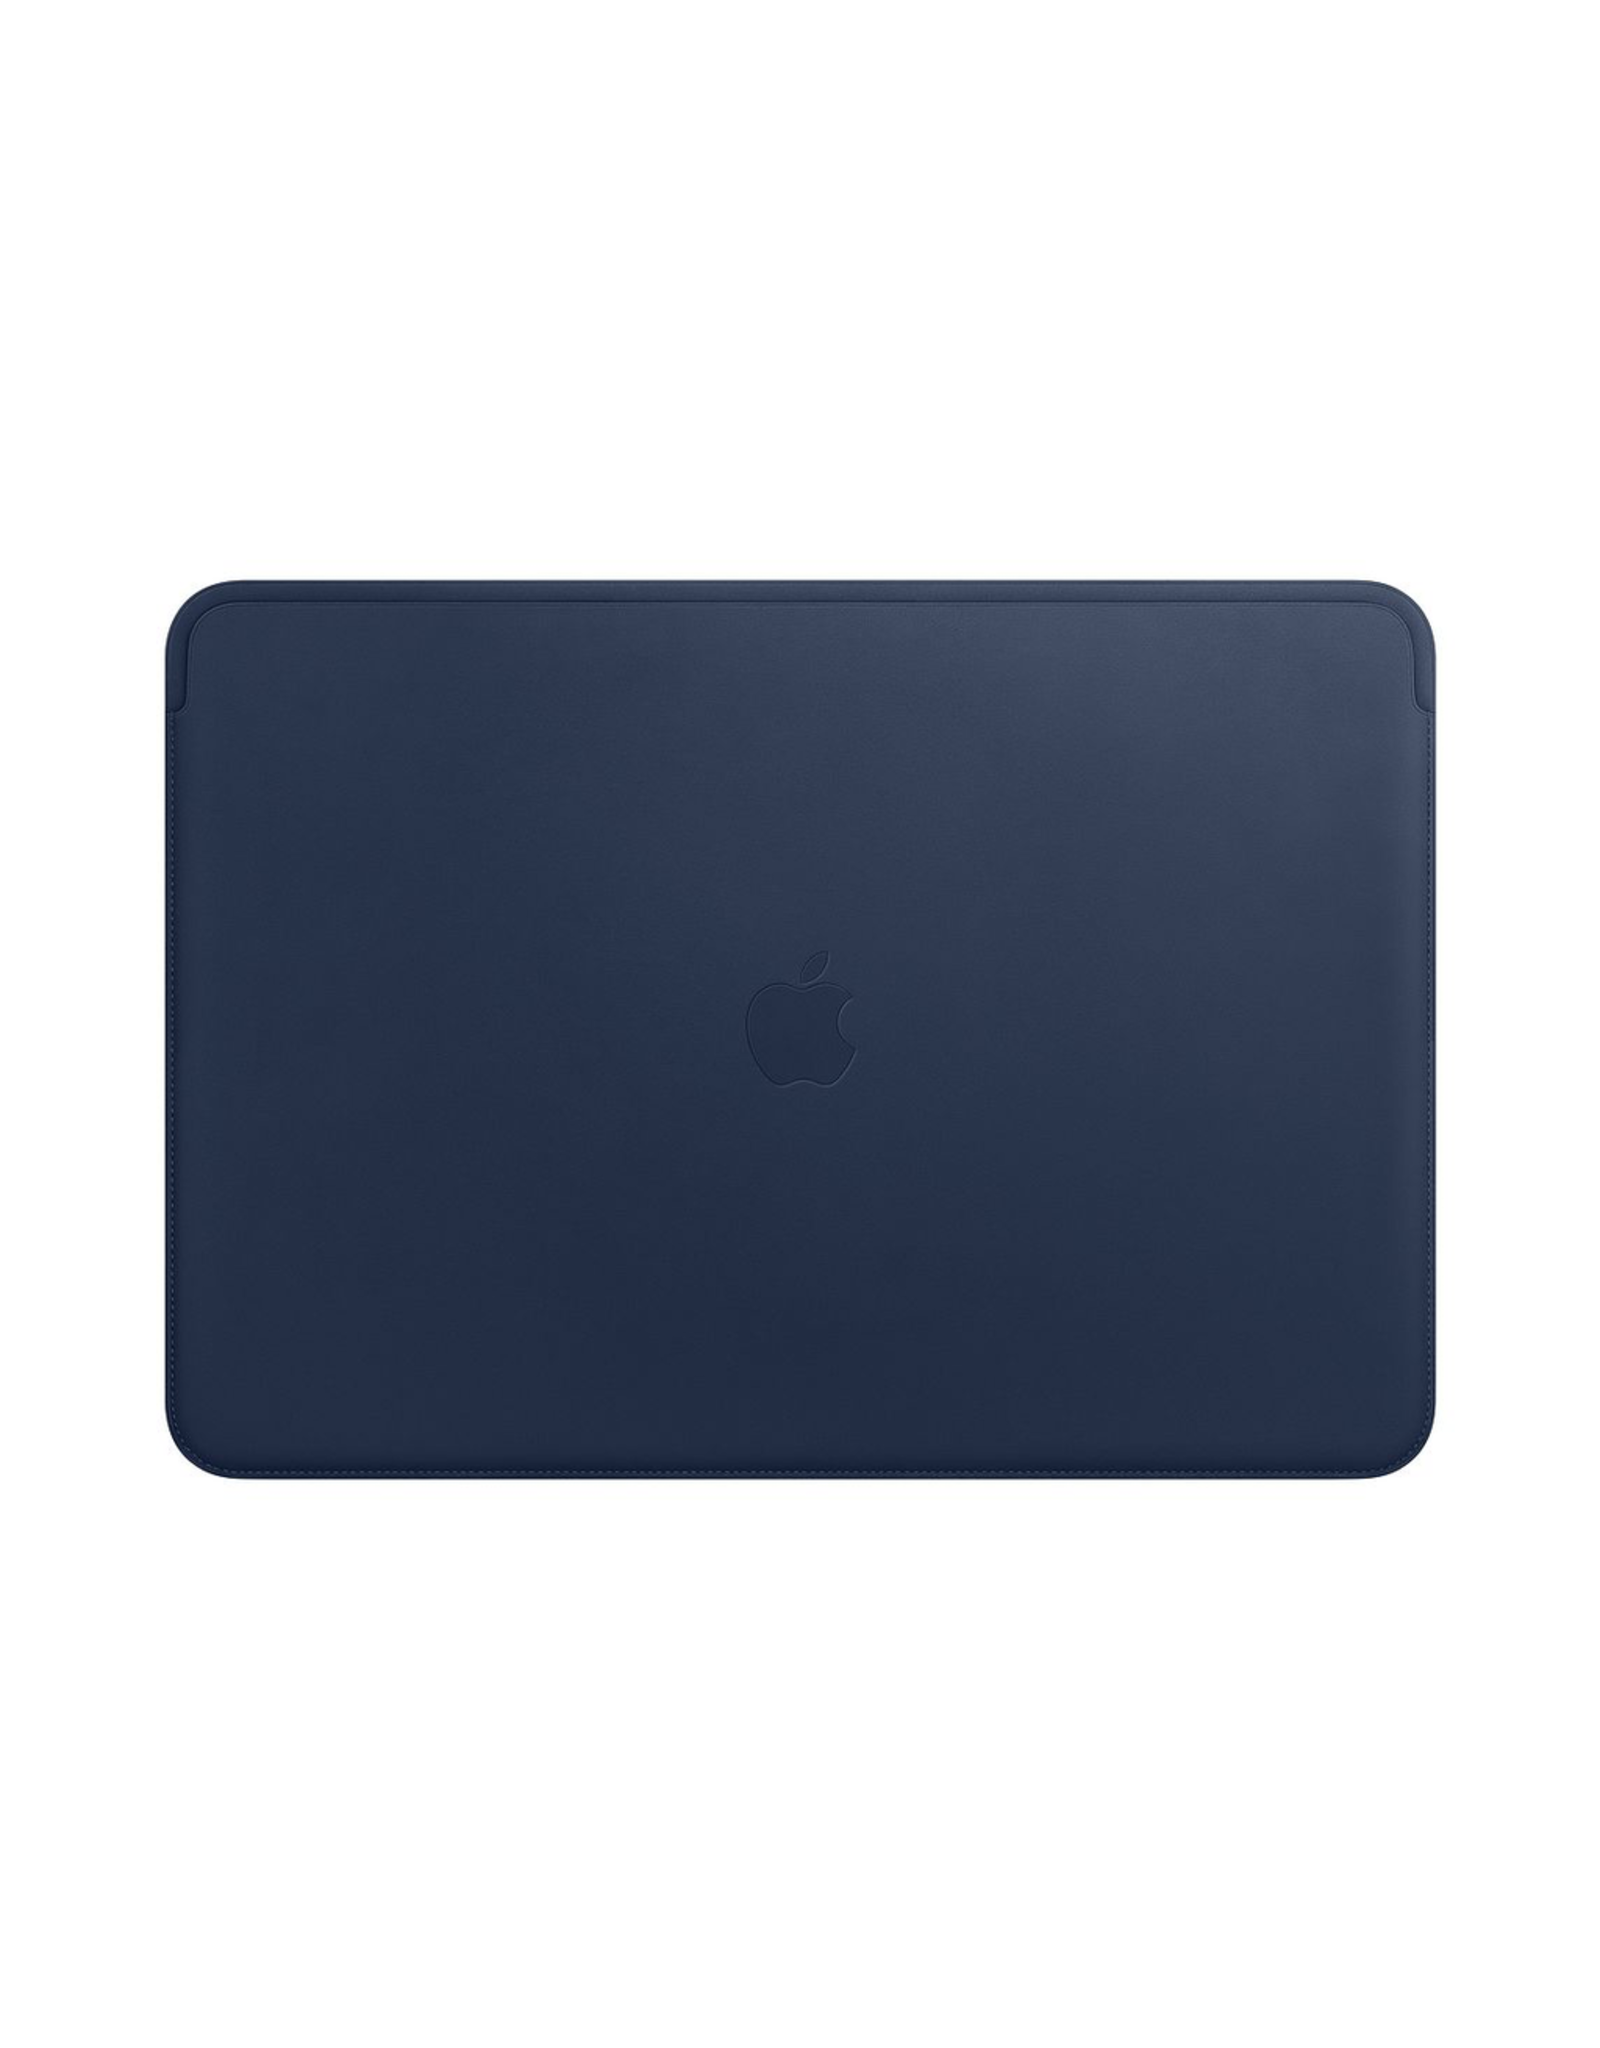 Apple Apple Leather Sleeve for 15-inch MacBook Pro - Midnight Blue